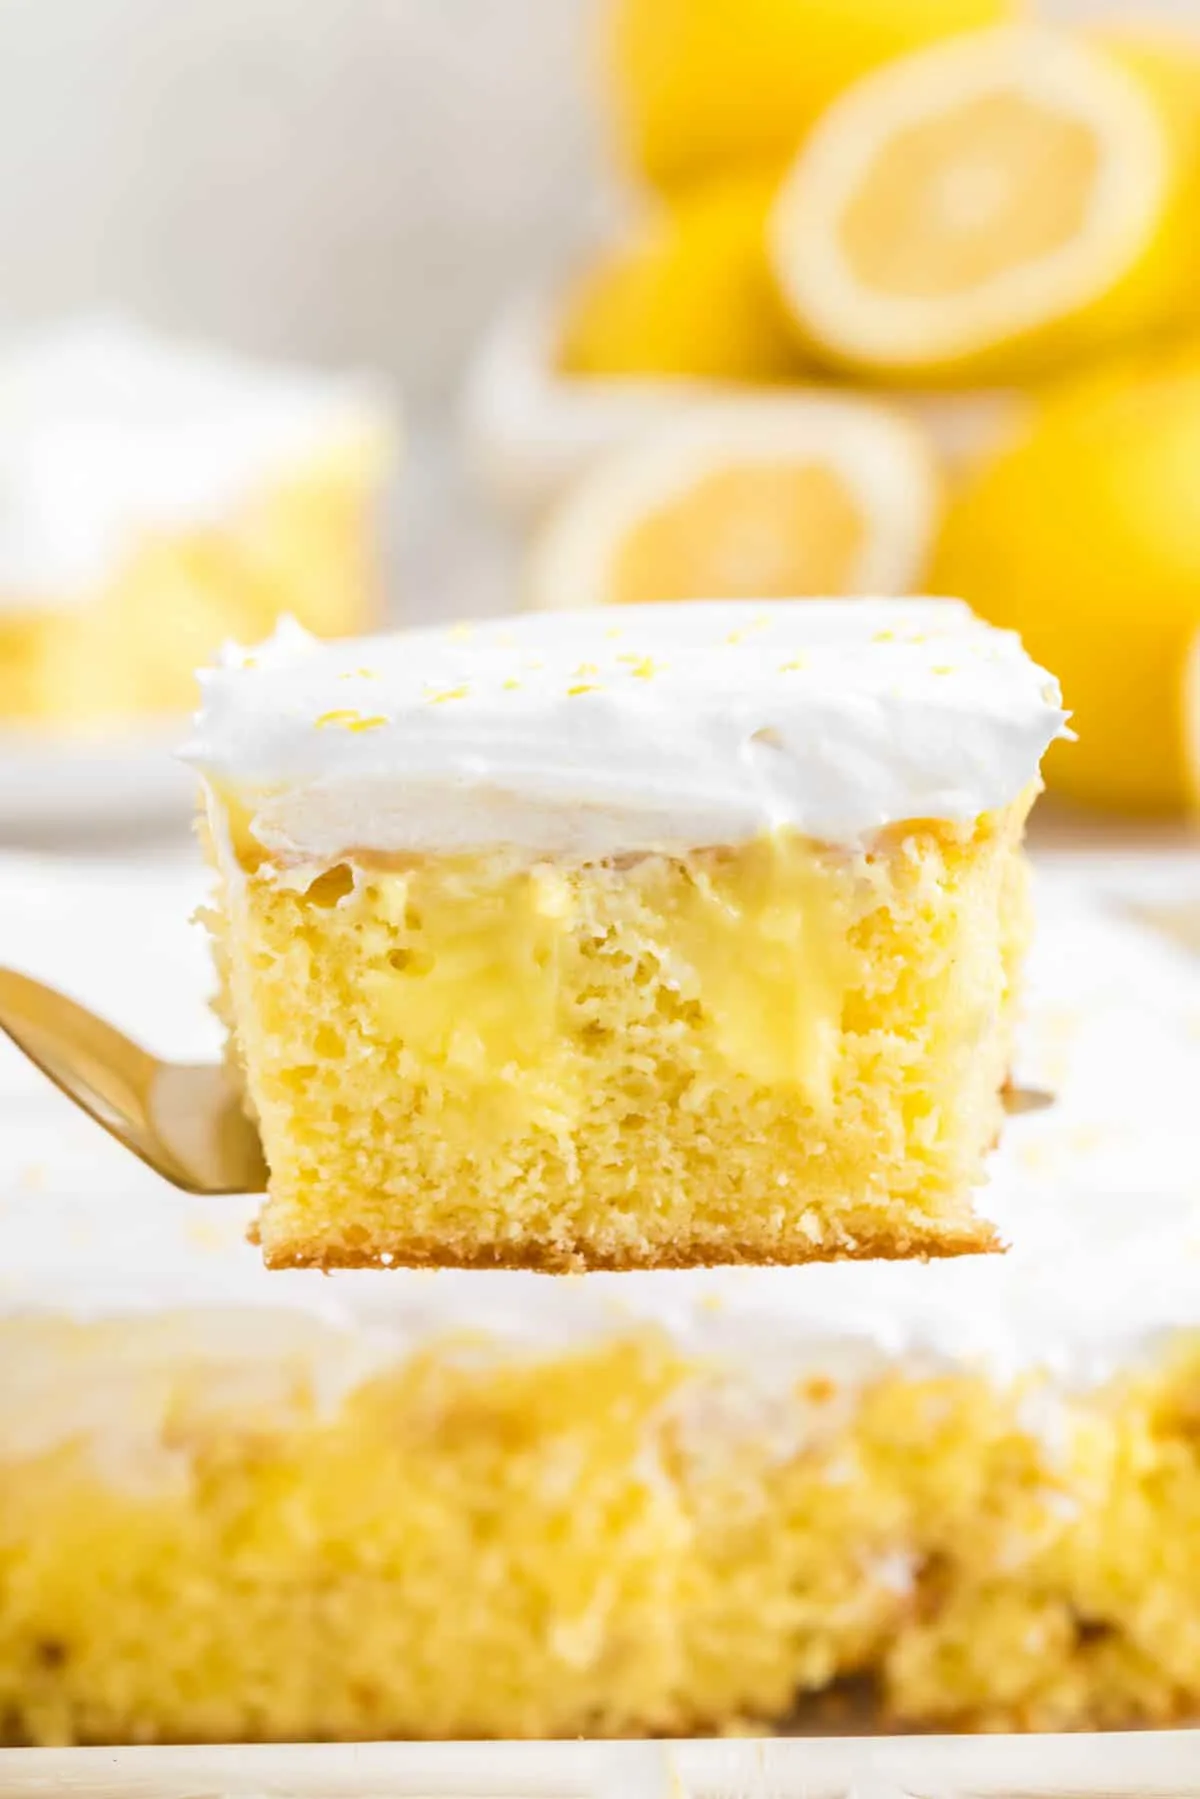 Lemon Poke Cake is a sweety and tangy dessert recipe made with boxed lemon cake mix, lemon instant pudding mix and Cool Whip.